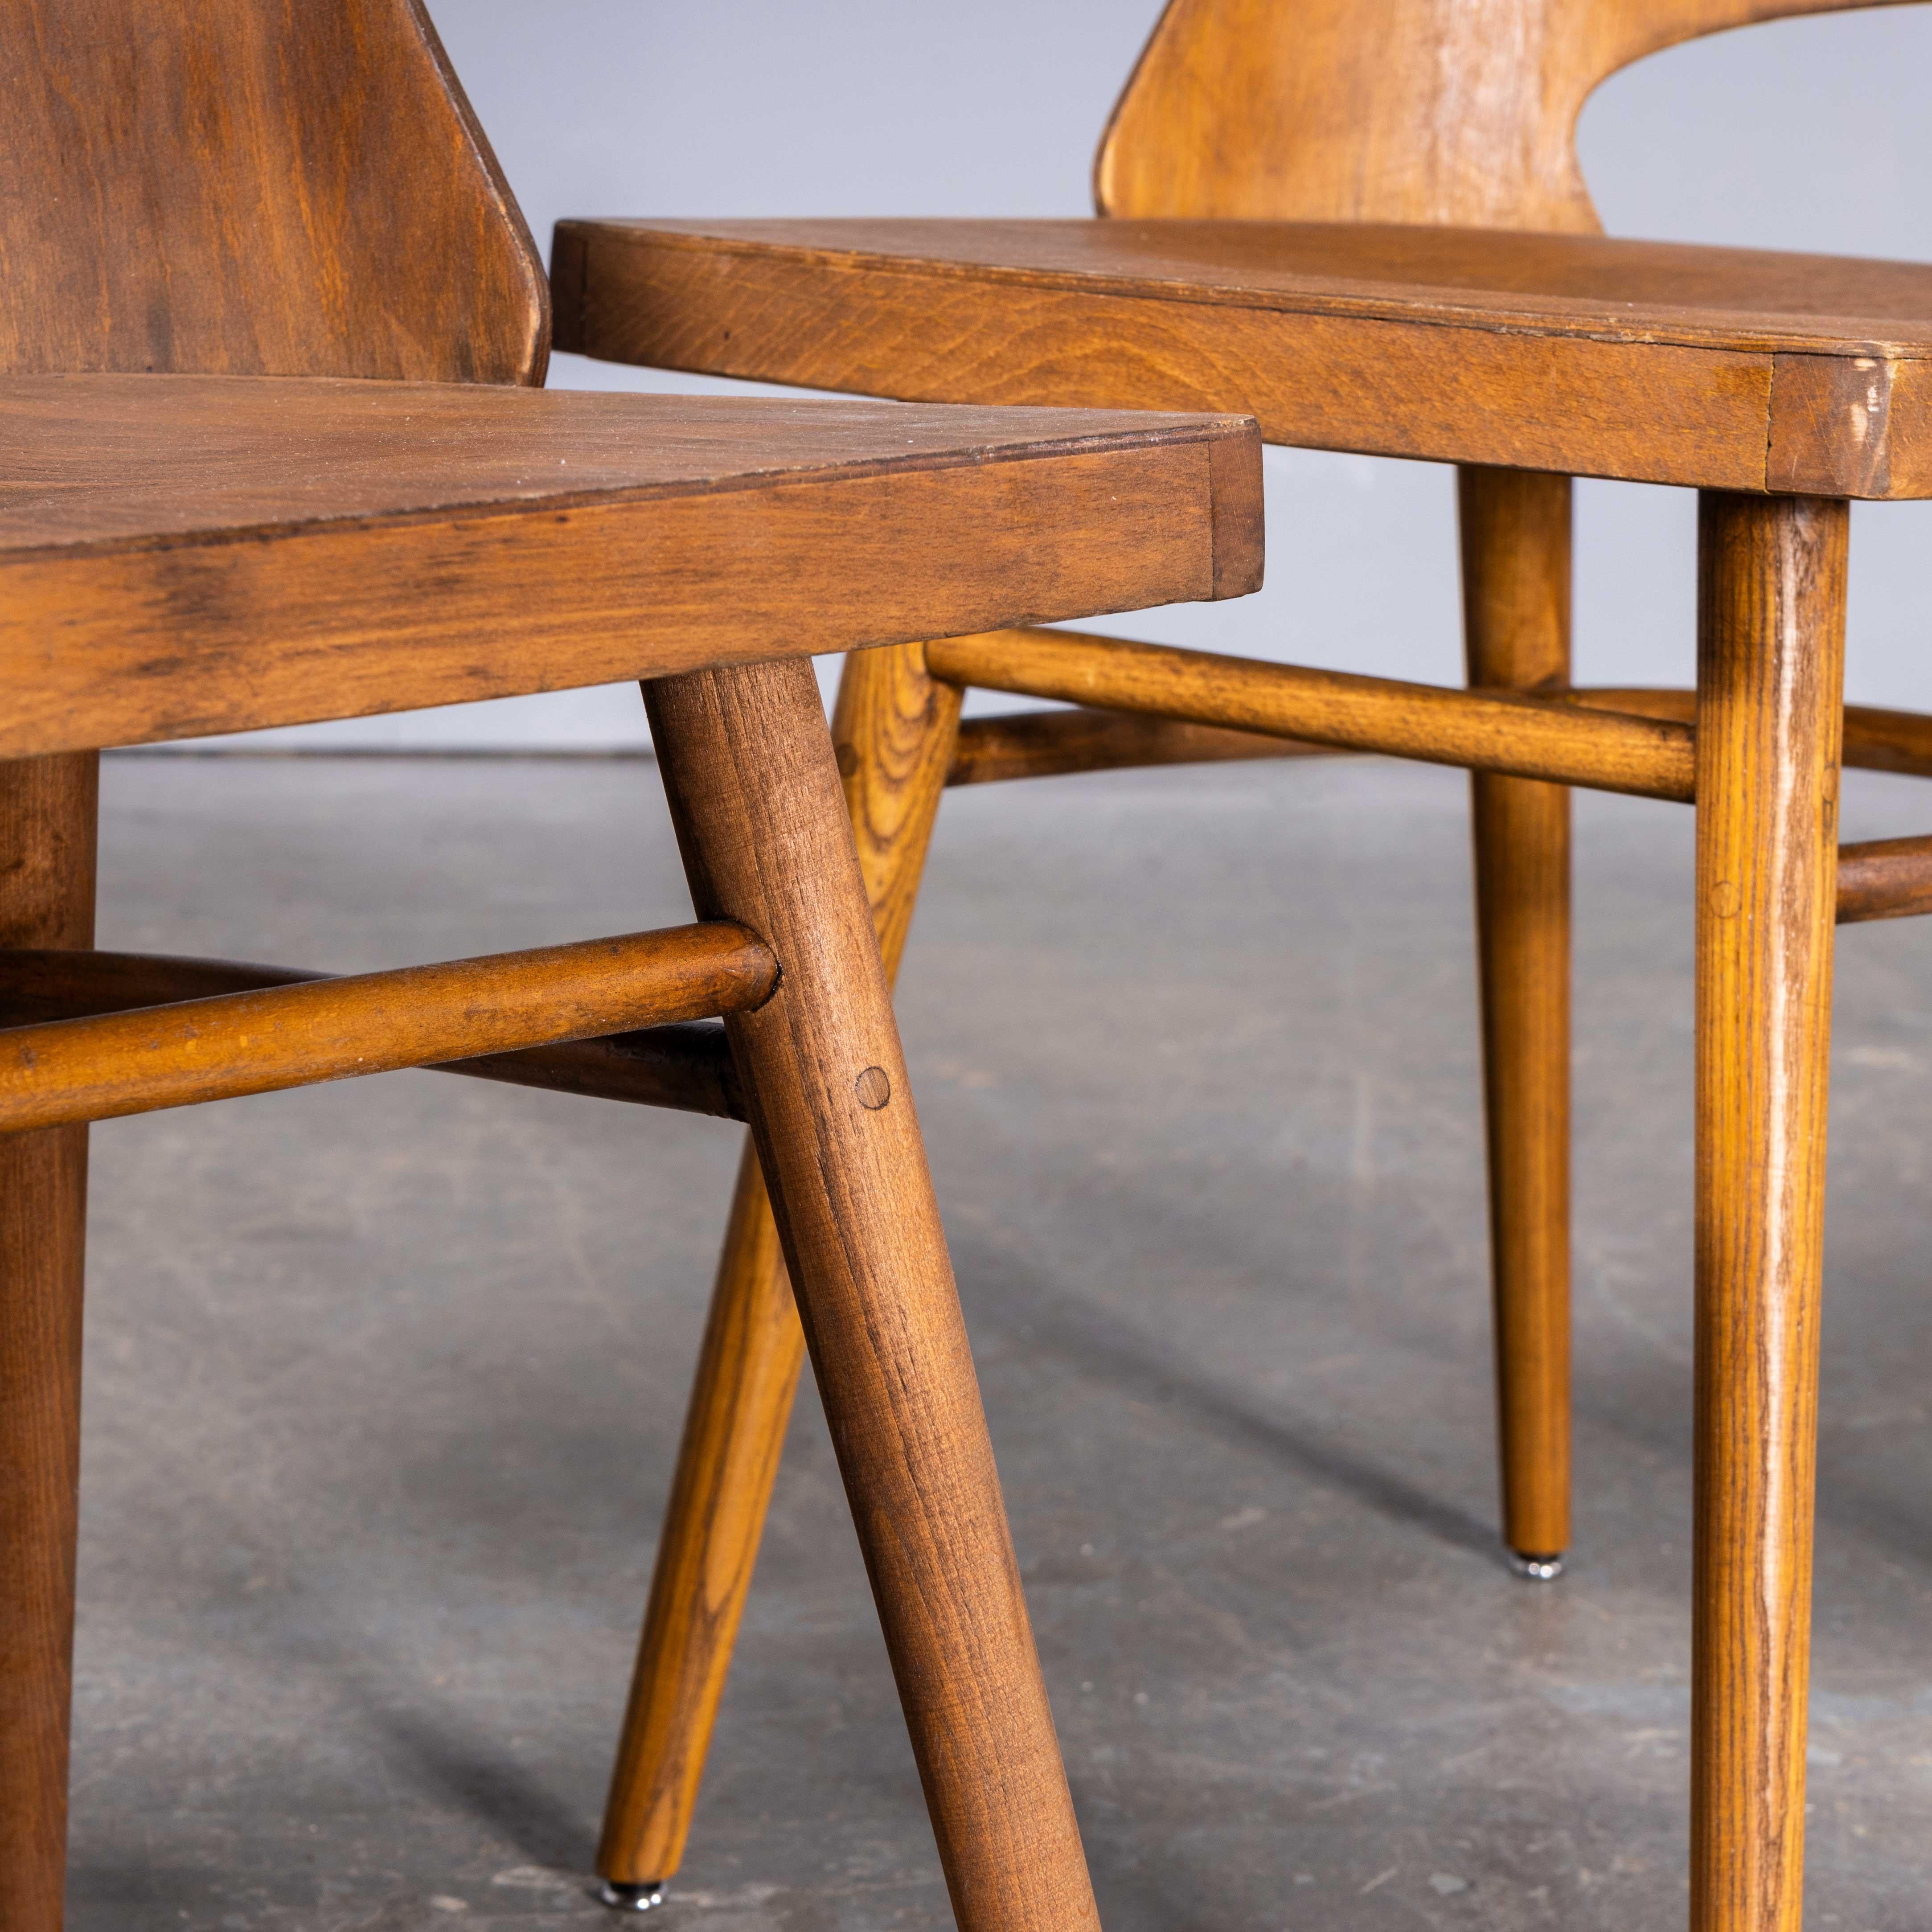 1950’s Mid Oak Dining Chairs By Radomir Hoffman For Ton – Pair
1950’s Mid Oak Dining Chairs By Radomir Hoffman For Ton -Pair. These chairs were produced by the famous Czech firm Ton, still trading today and producing beautiful chairs, they are an